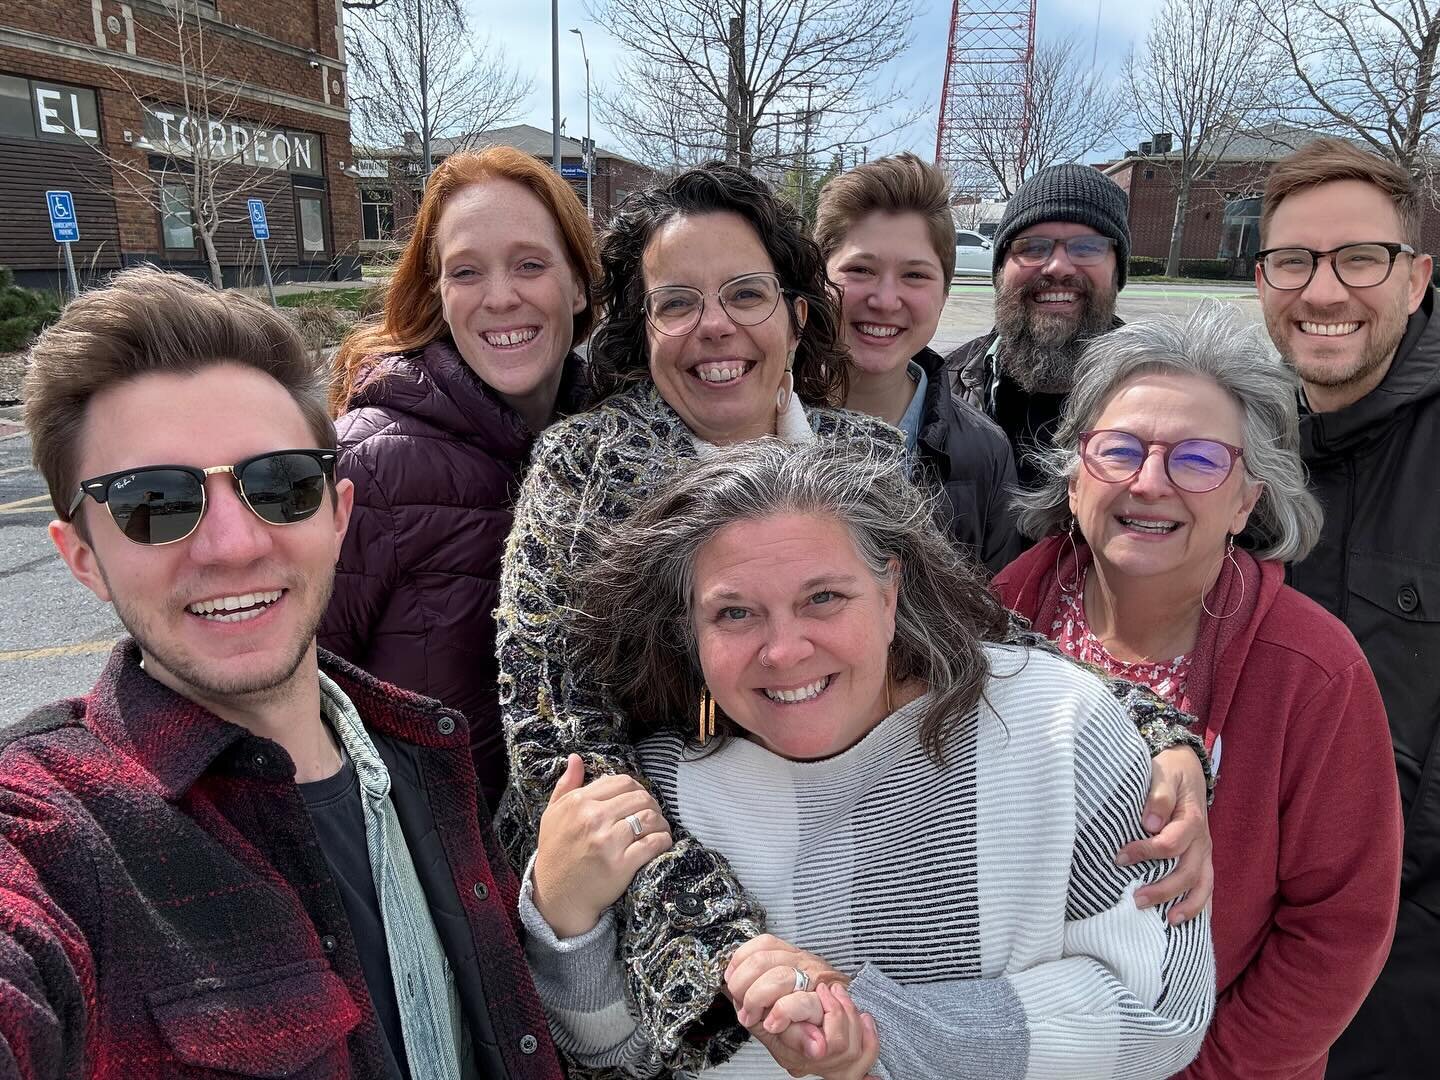 It was such an incredible weekend with our Oversight Team that we forgot to take a group photo before Adam headed out. But that&rsquo;s what Photoshop is for!

So grateful to each one of you for walking with us. ❤️